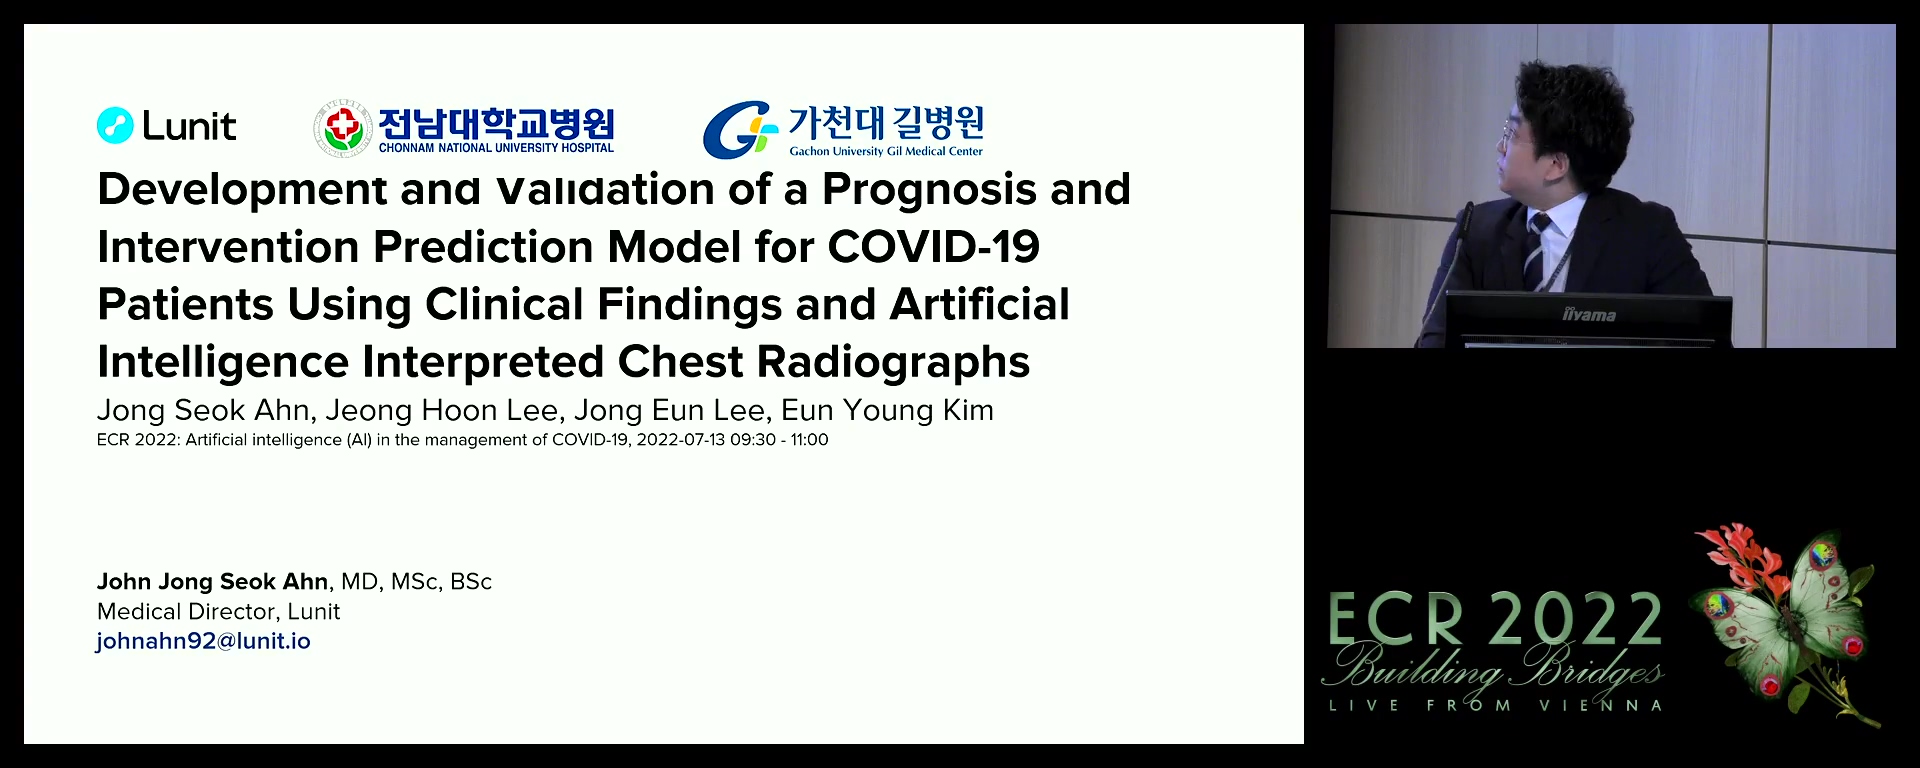 Development and validation of a prognosis and intervention prediction model for COVID-19 patients using clinical findings and artificial intelligence interpreted chest radiographs - Jong Seok Ahn, Seoul / KR